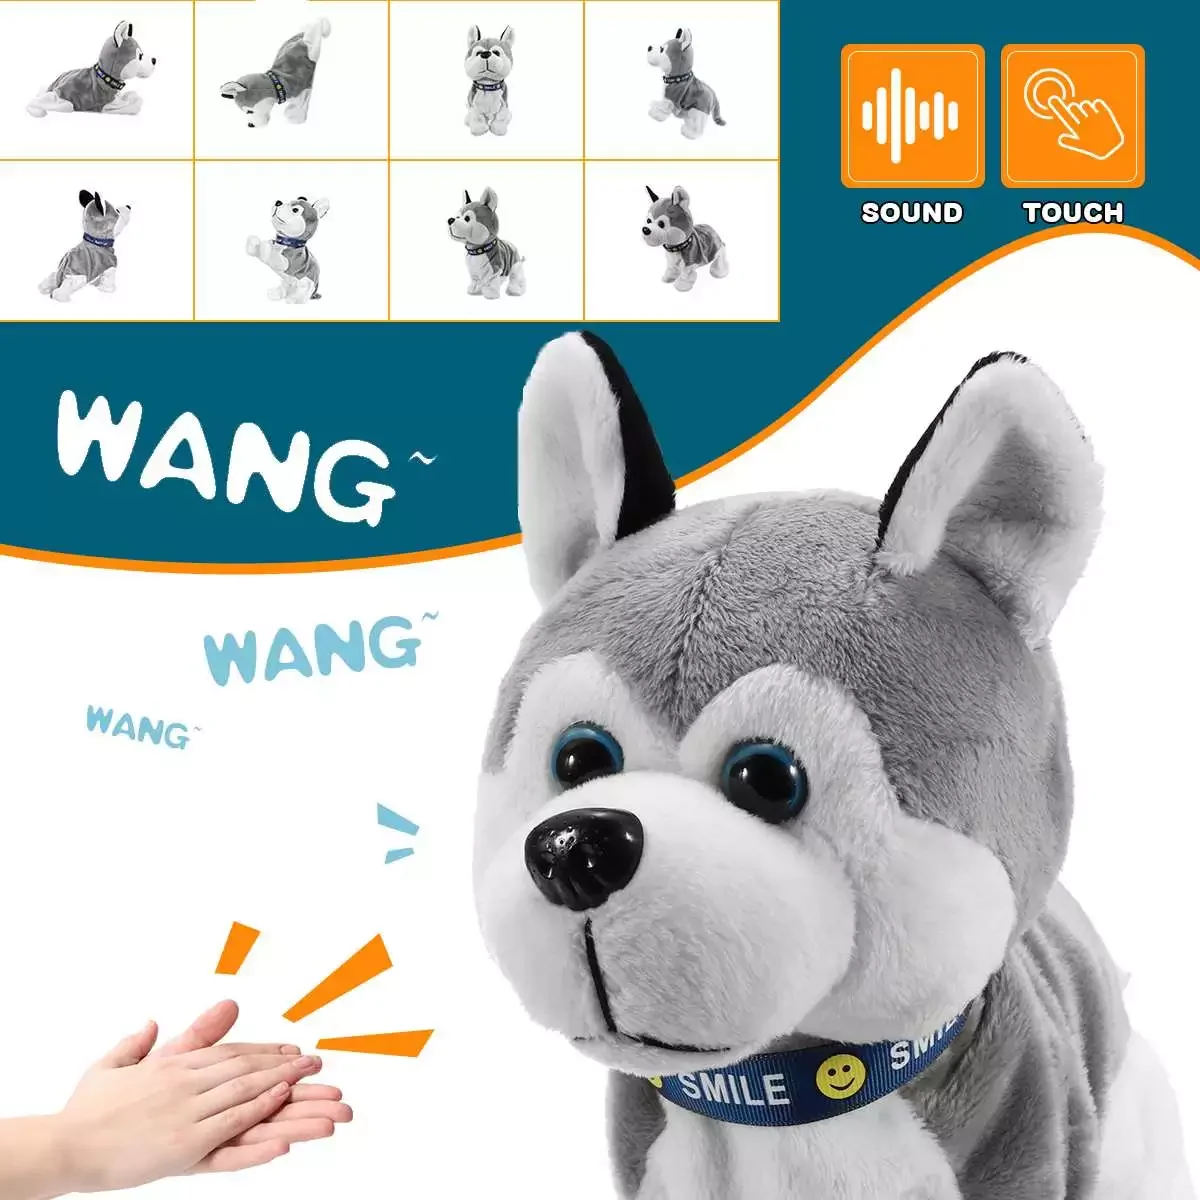 https://ae01.alicdn.com/kf/S665564022dd4463eb0ef71ea4eb0de17j/Sound-Control-Electronic-Robot-Dog-Kids-Plush-Toy-Sound-Control-Interactive-Bark-Stand-Walk-Electronic-Toys.jpg